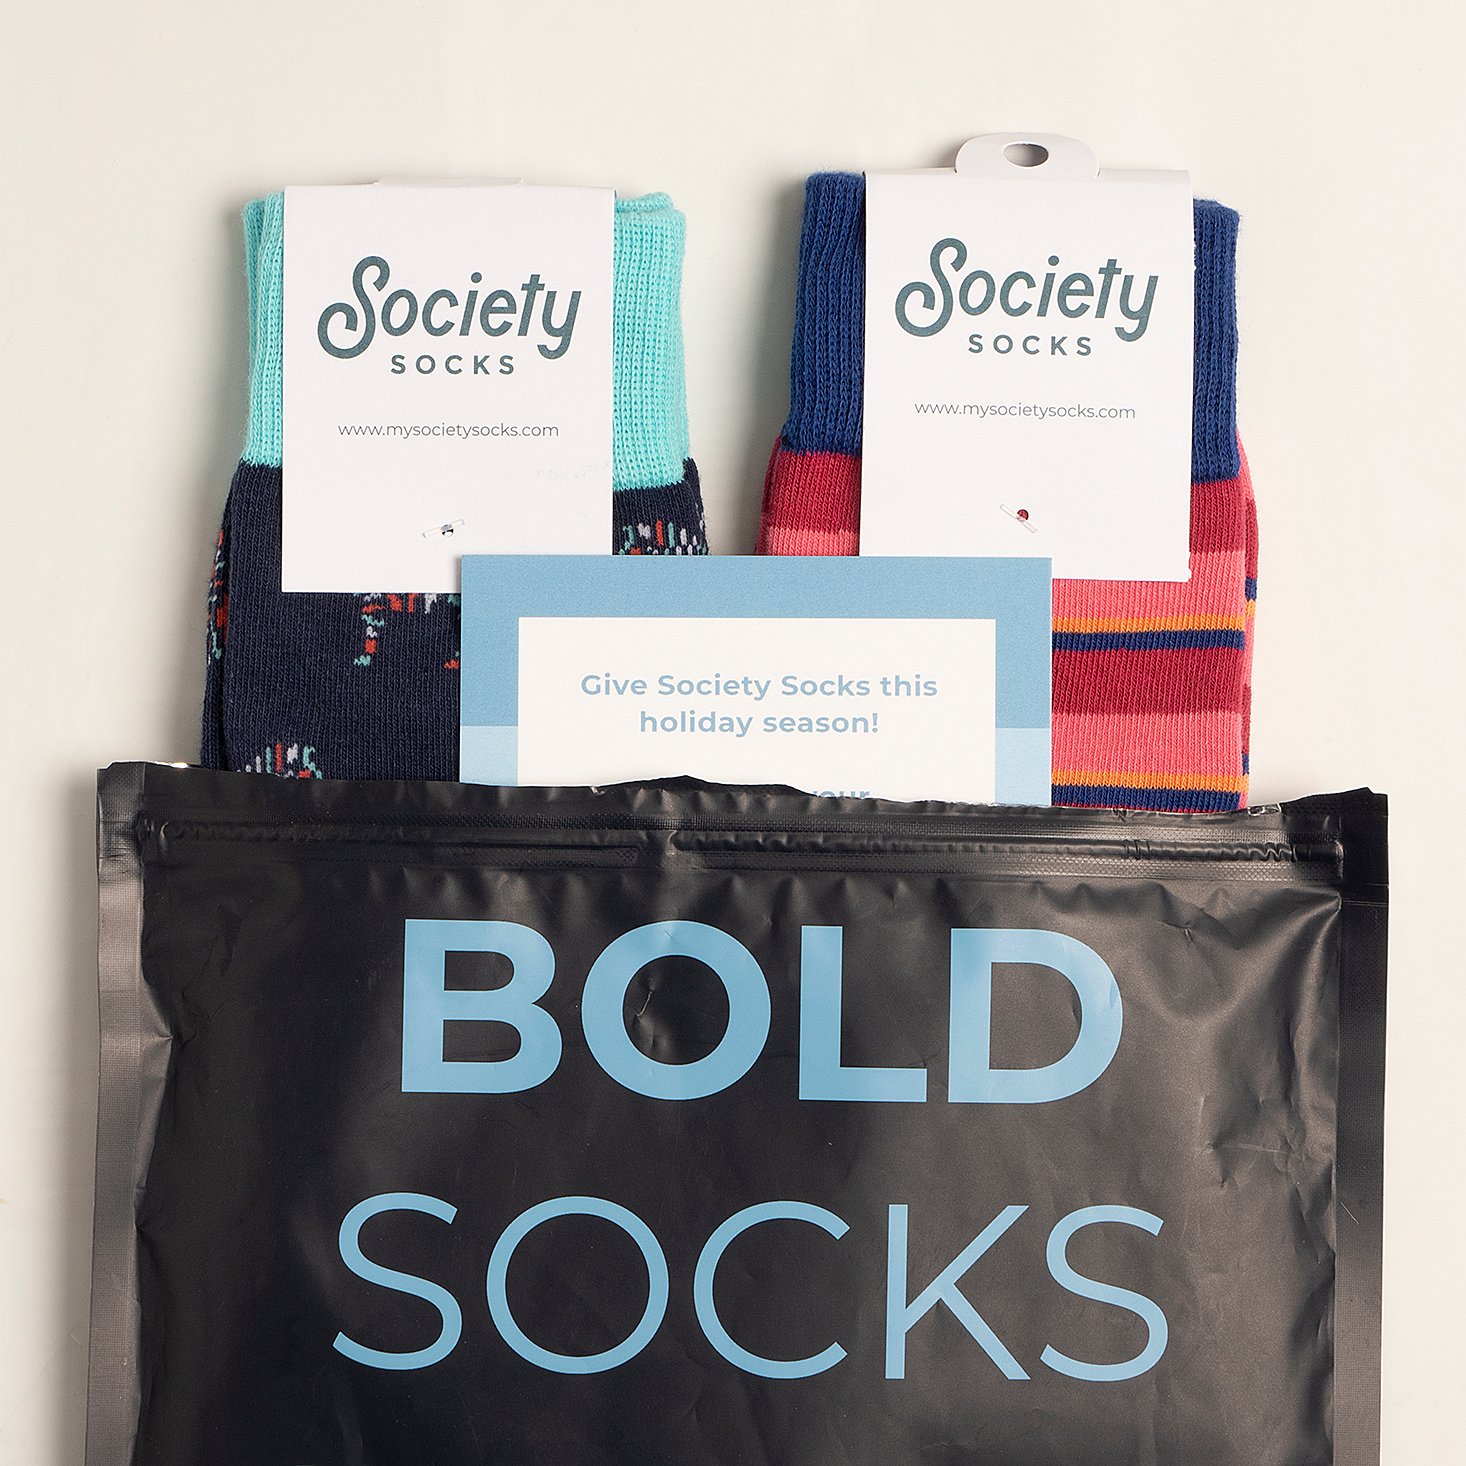 Society Socks MSA Holiday 2021 Exclusive Deal: Take 15% Off Everything!